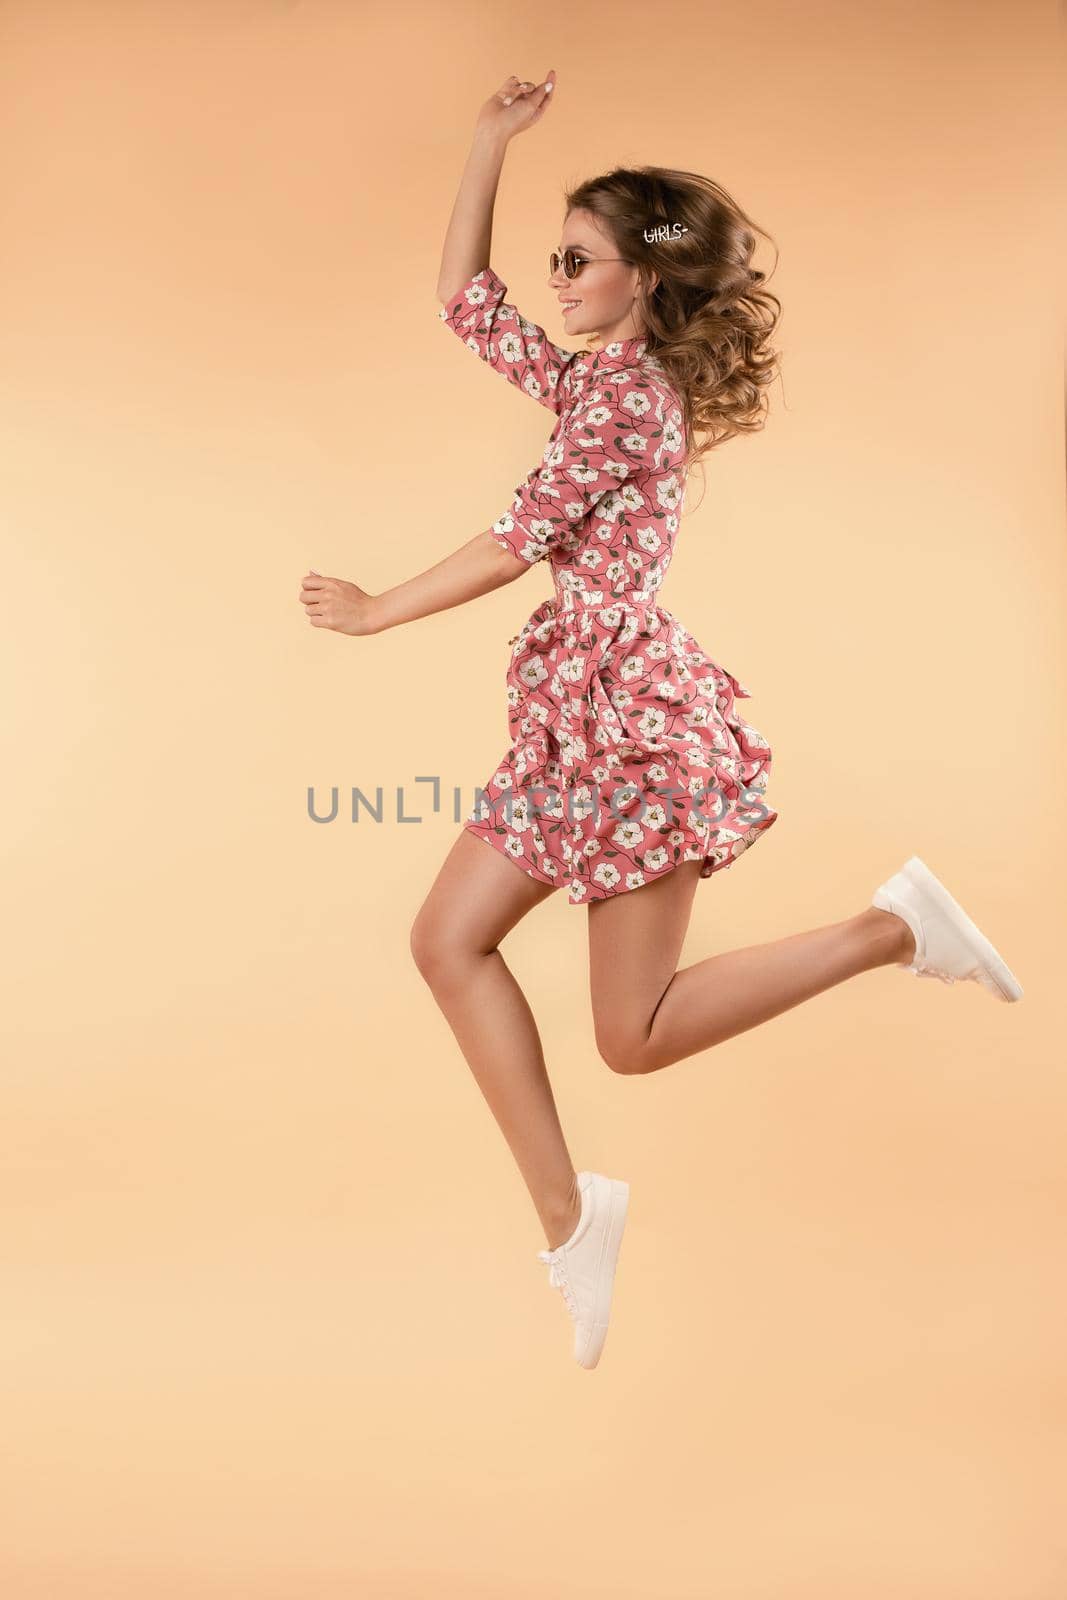 Side view of crazy girl wearing pink floral dress and white sneakers jumping and laughing in studio. Attractive young female in glasses enjoying warm weather and stylish outfit. Concept of happiness.